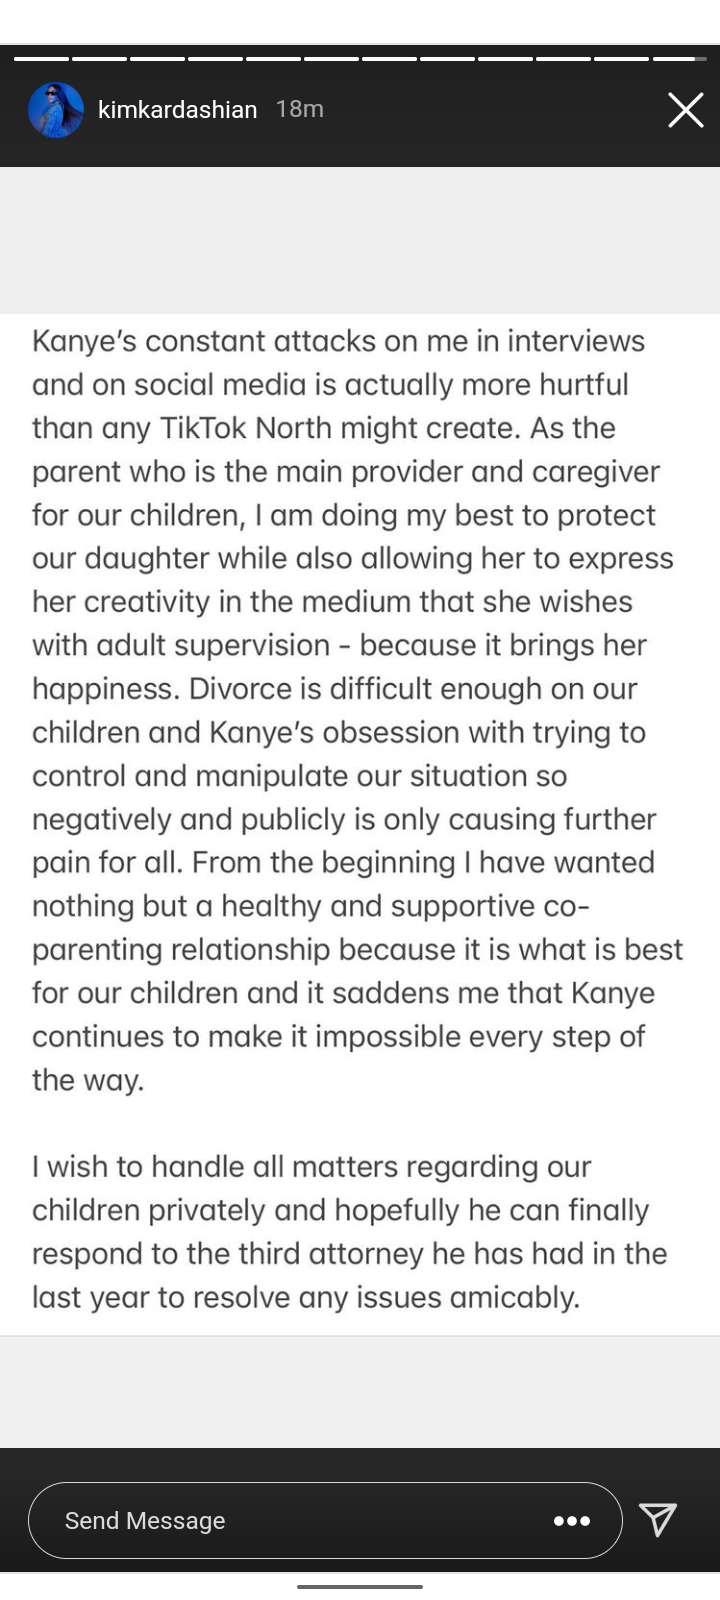 Kanye's attacks on me is more hurtful than any TikTok North might create - Kim responds